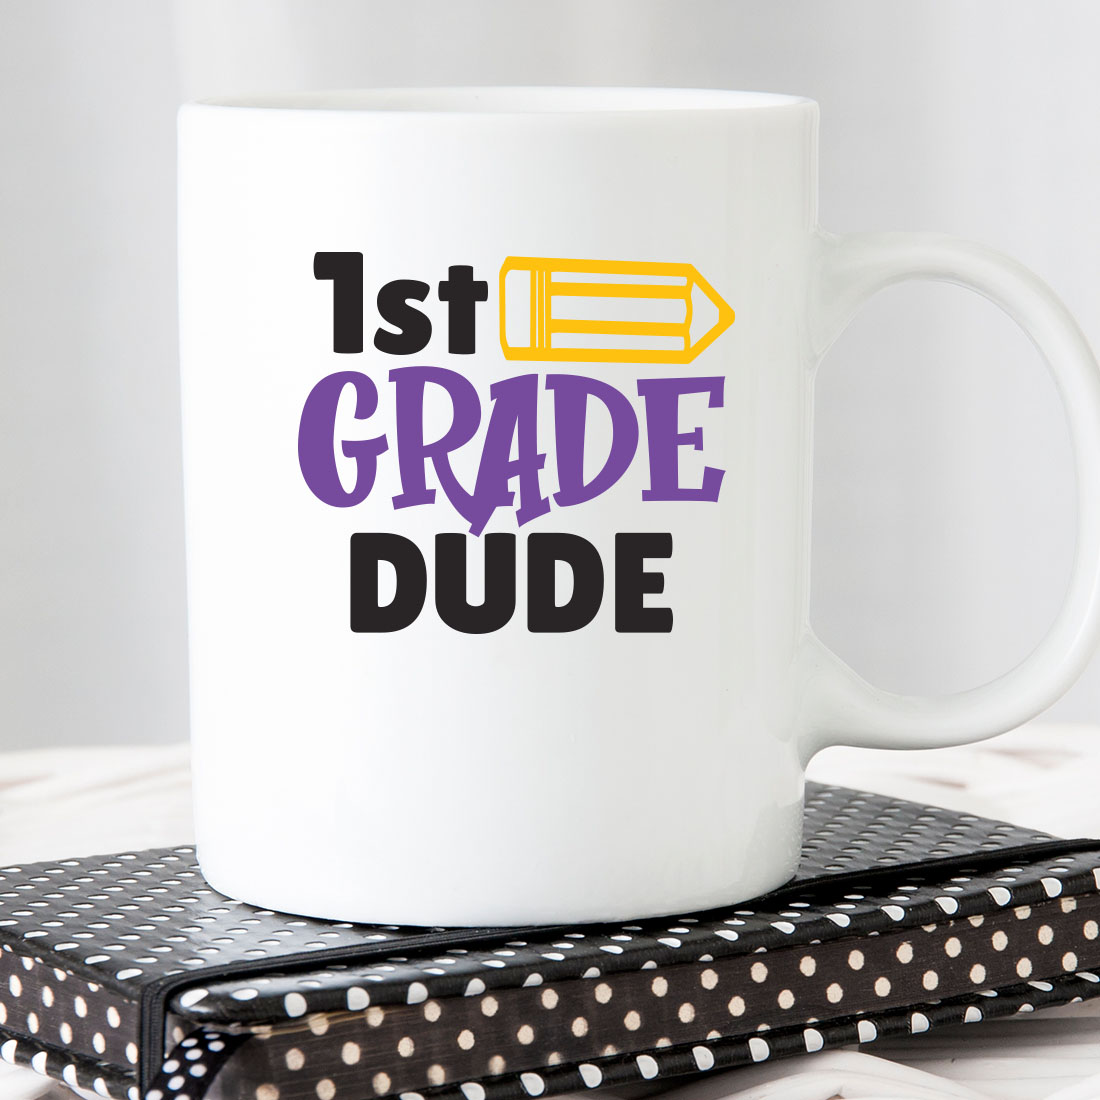 White coffee mug with the words 1st grade dude on it.